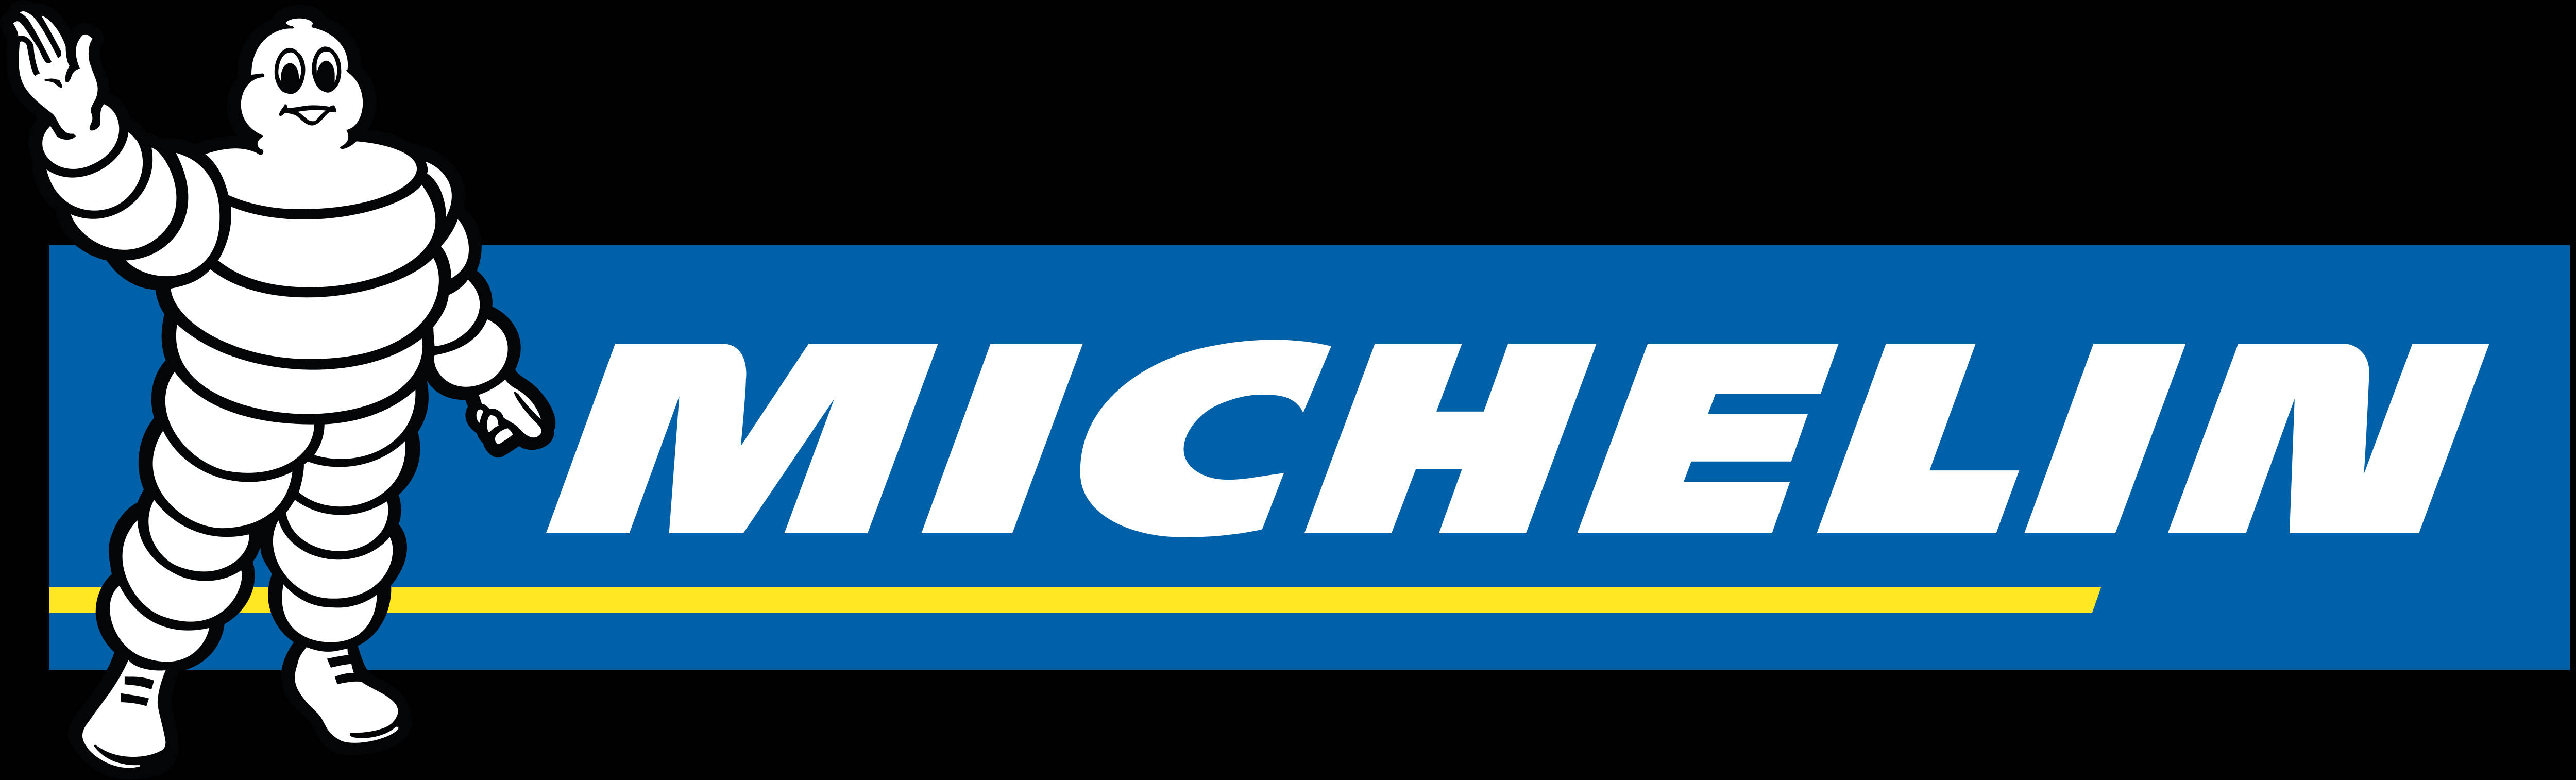 Iconic Michelin logo on a vibrant background Wallpaper